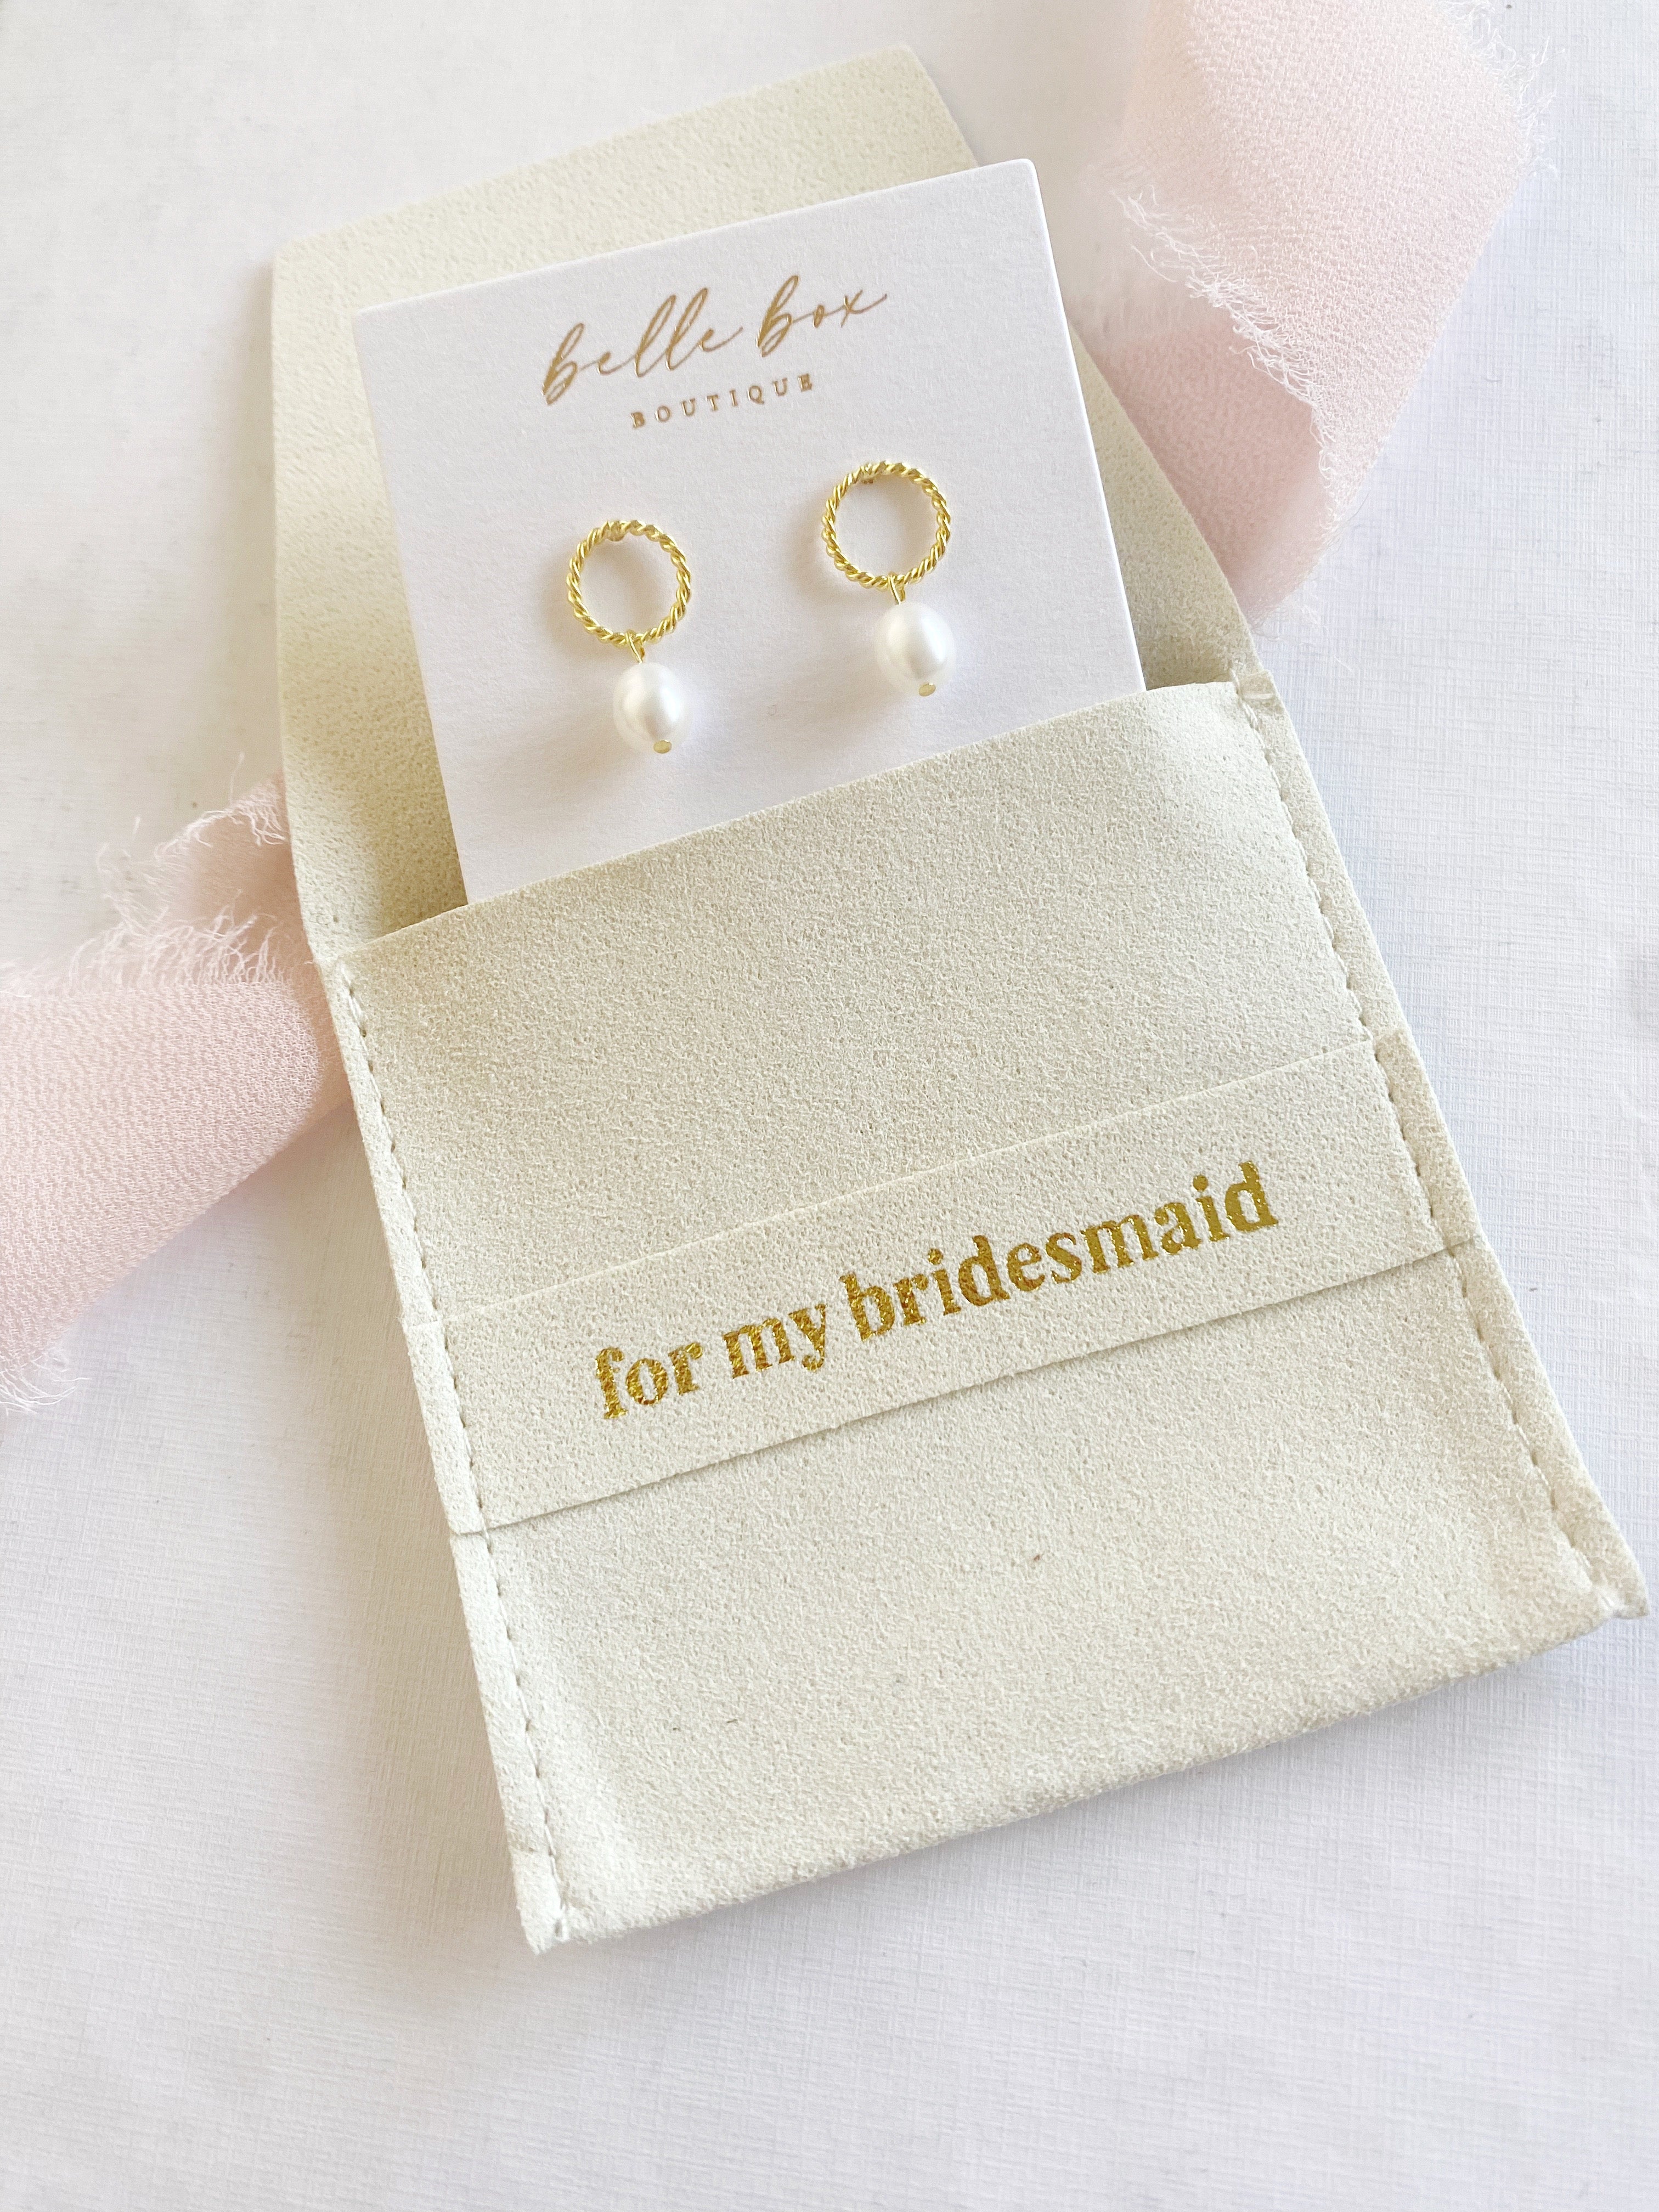 “for my bridesmaid” jewelry bag